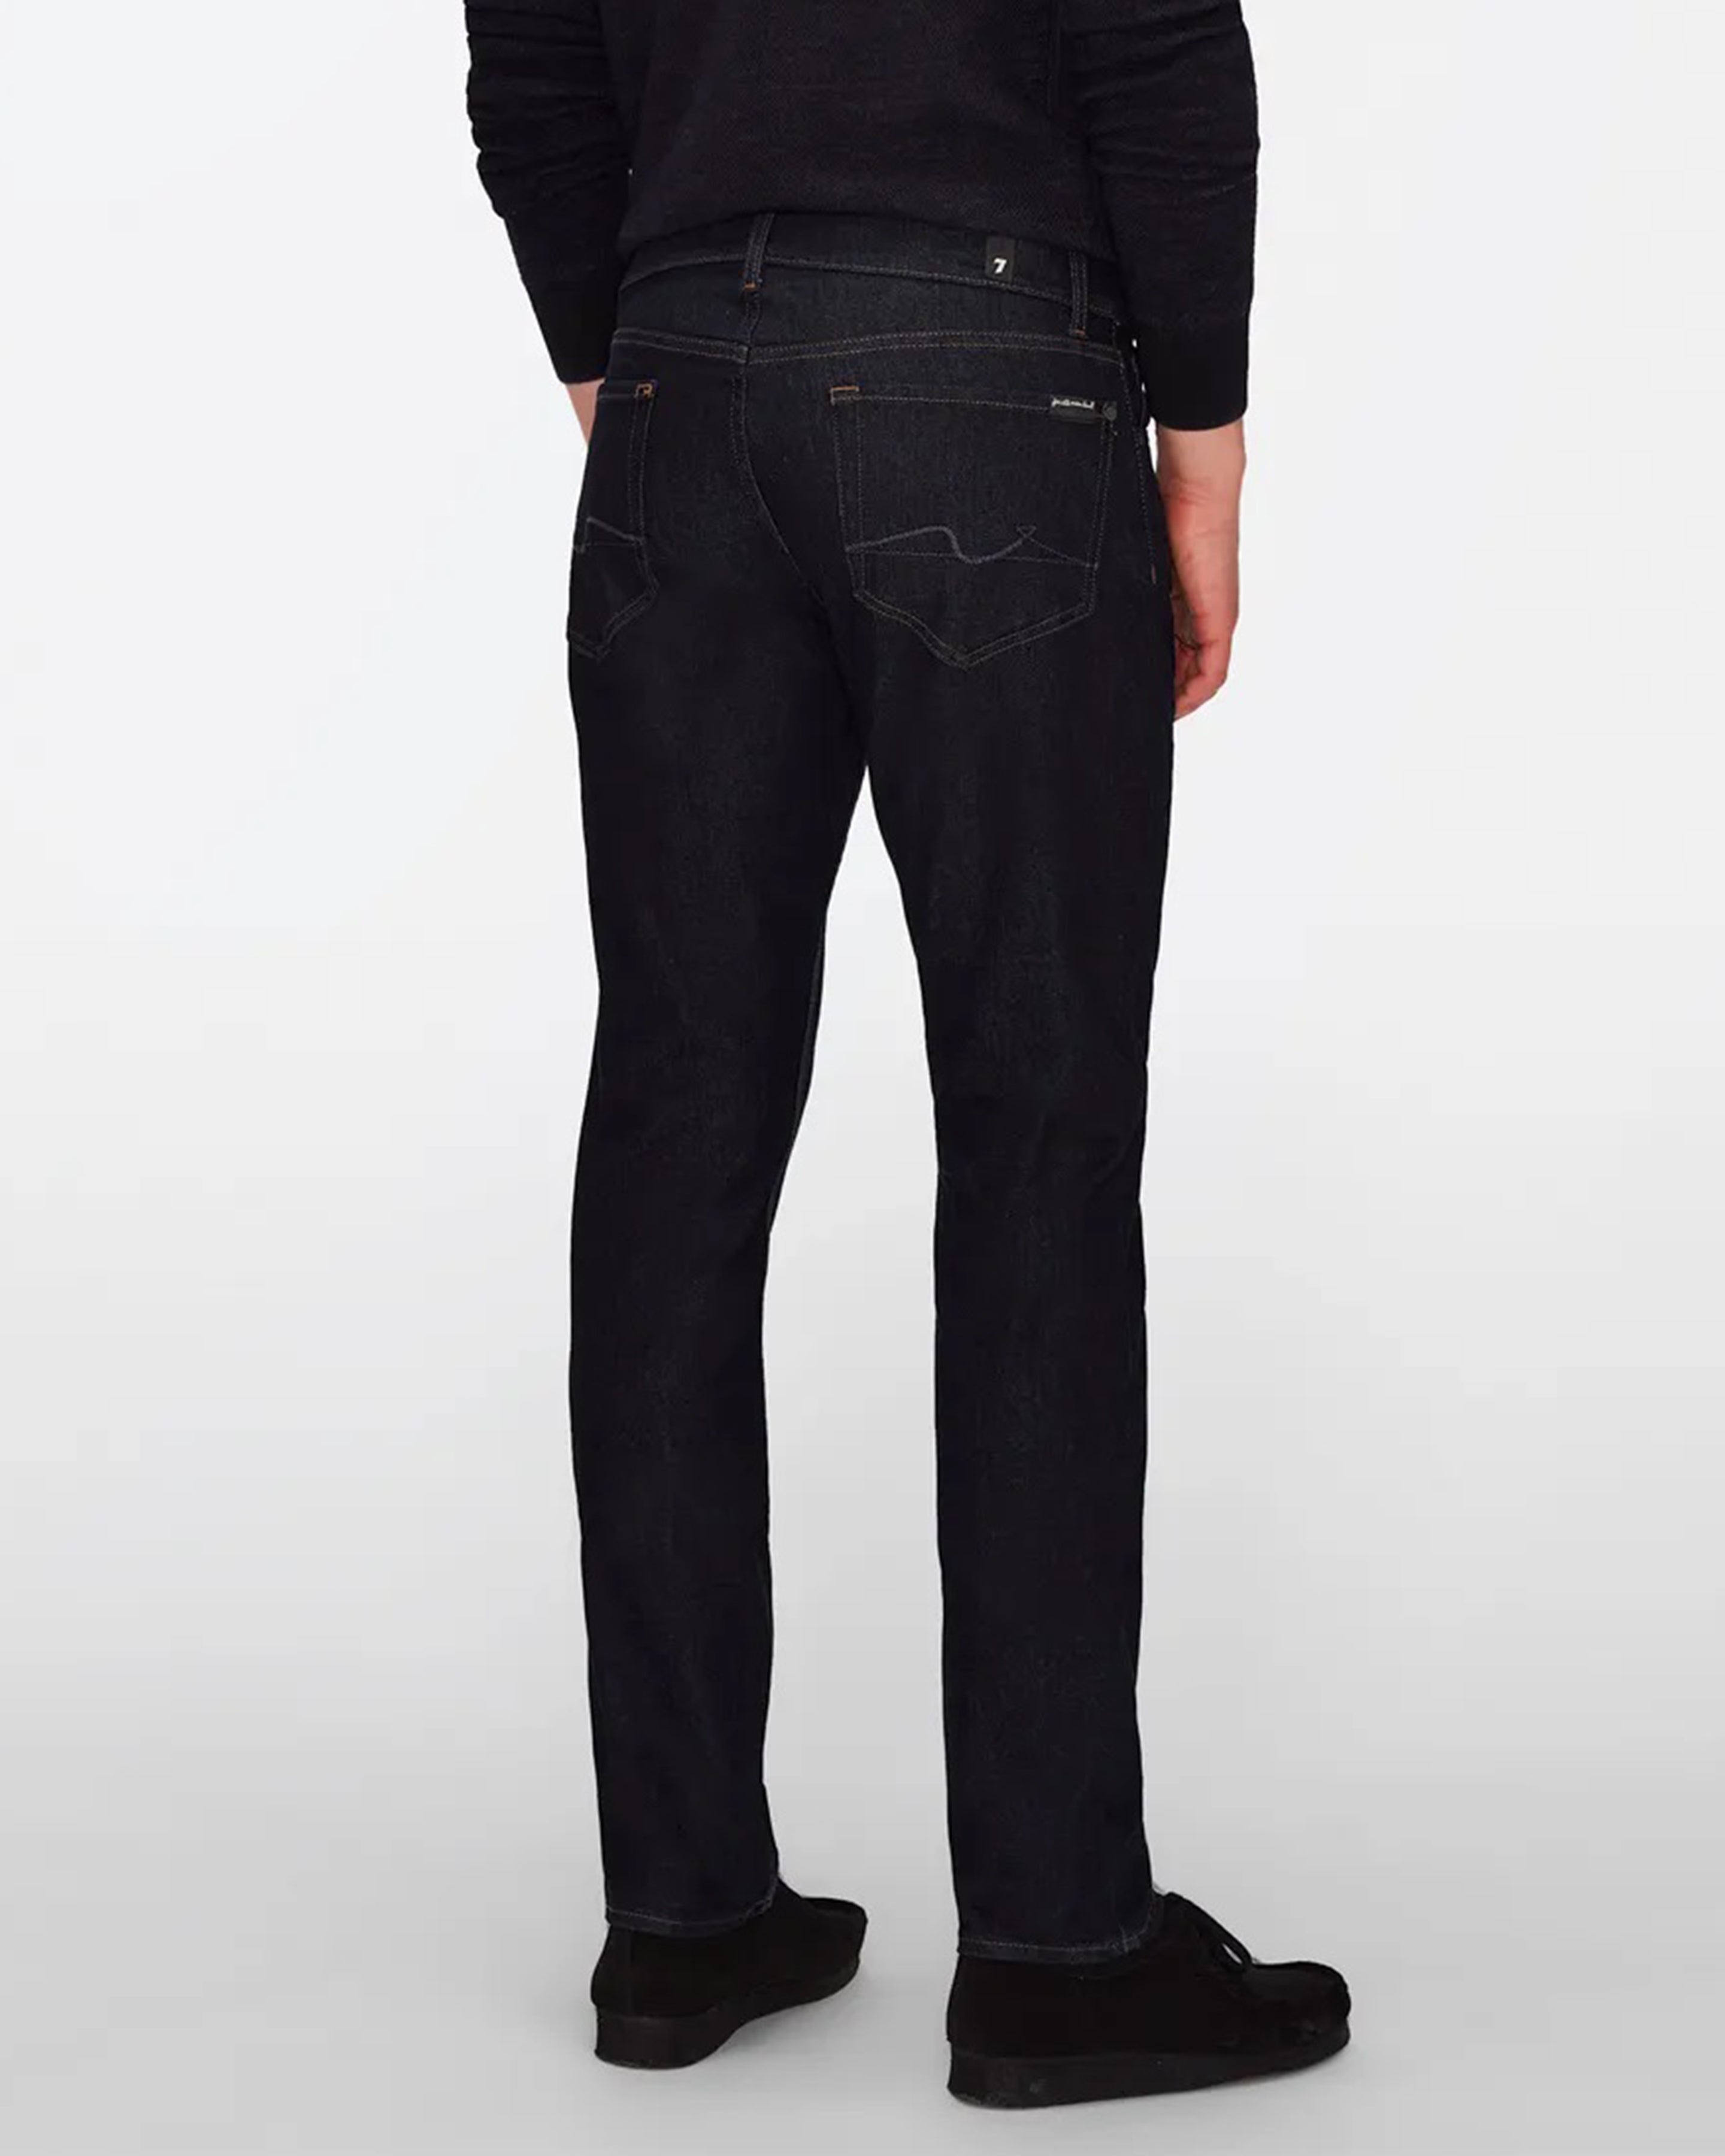 7 FOR ALL MANKIND - SLIMMY Luxe Performance Eco Super Rinse Dark Blue Jeans JSMSB800RB